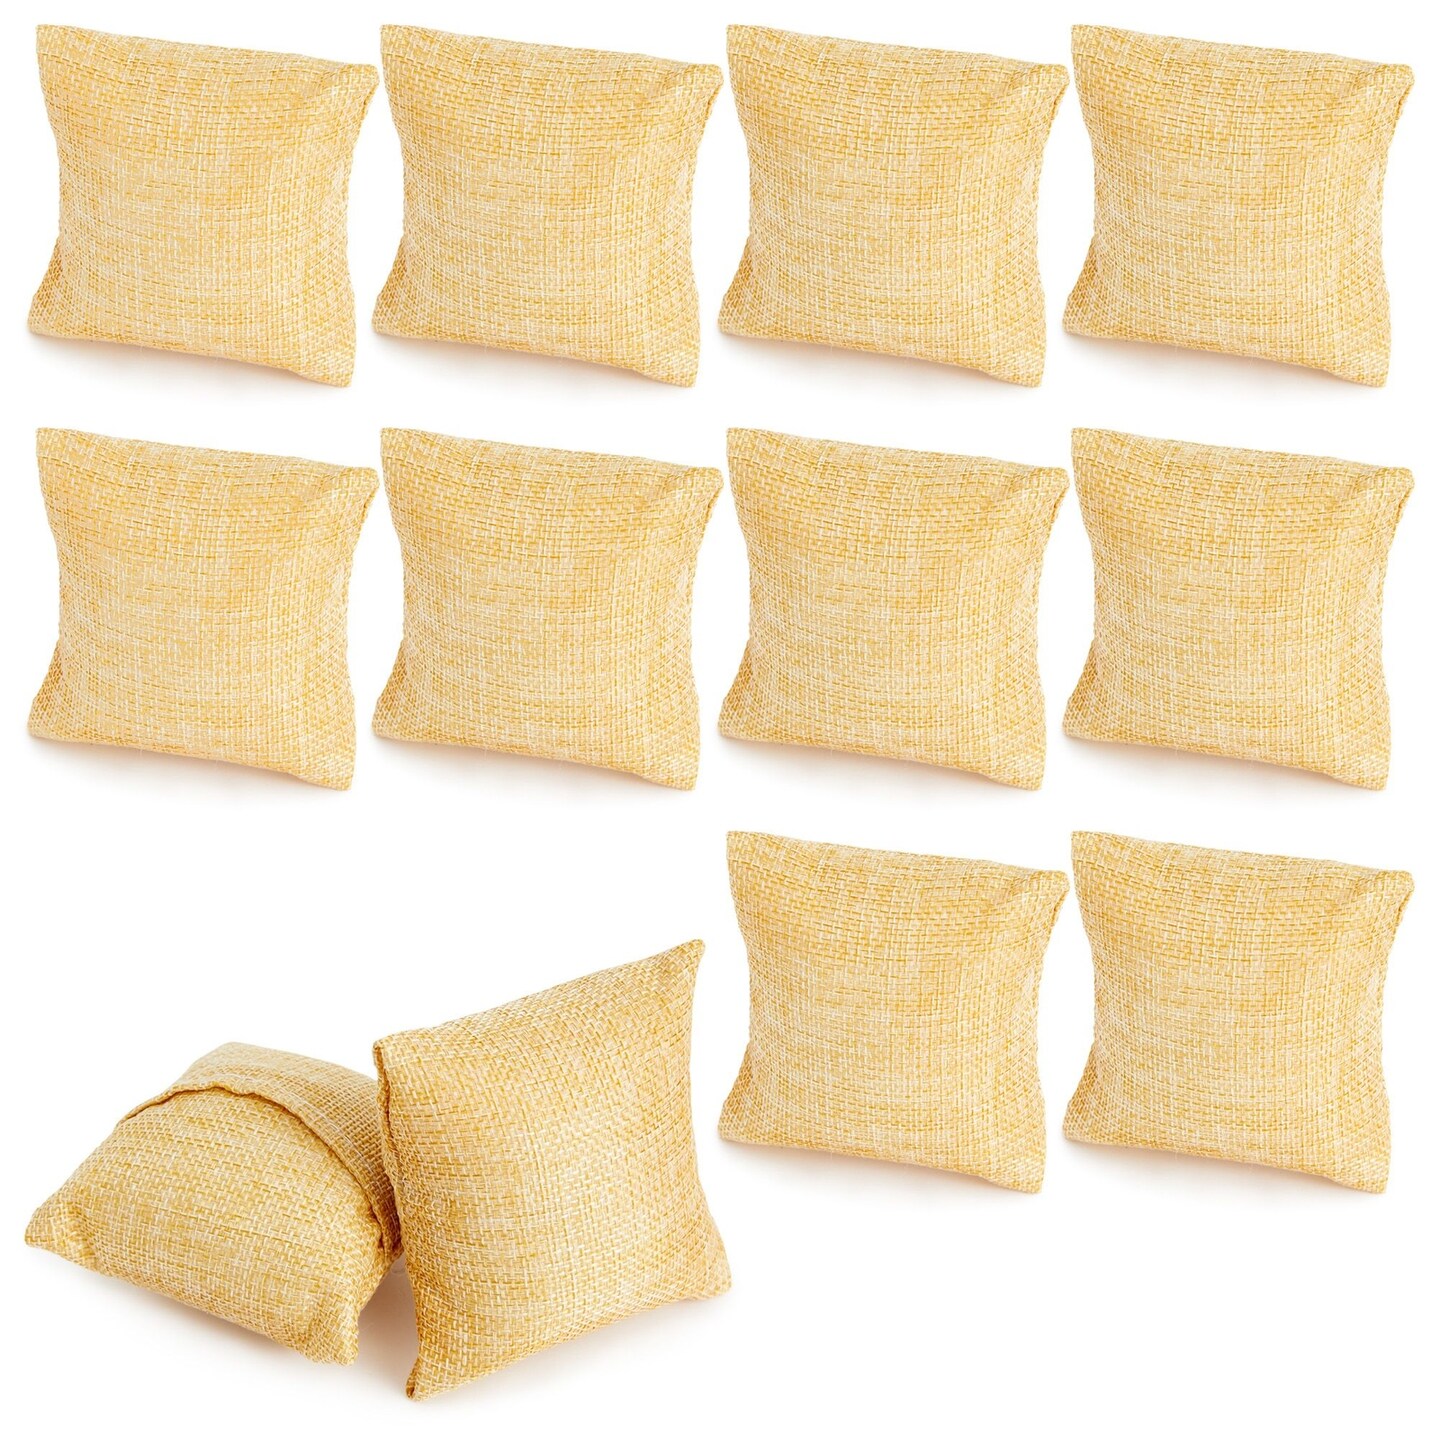 12 Pack Linen Bracelet Cushion, Pillow Holder for Accessories, Watches and Bangles, Jewelry Display for Selling, Ideal for Small Business, Retail, Boutique, Trade Shows (Beige, 3x3x2 in)